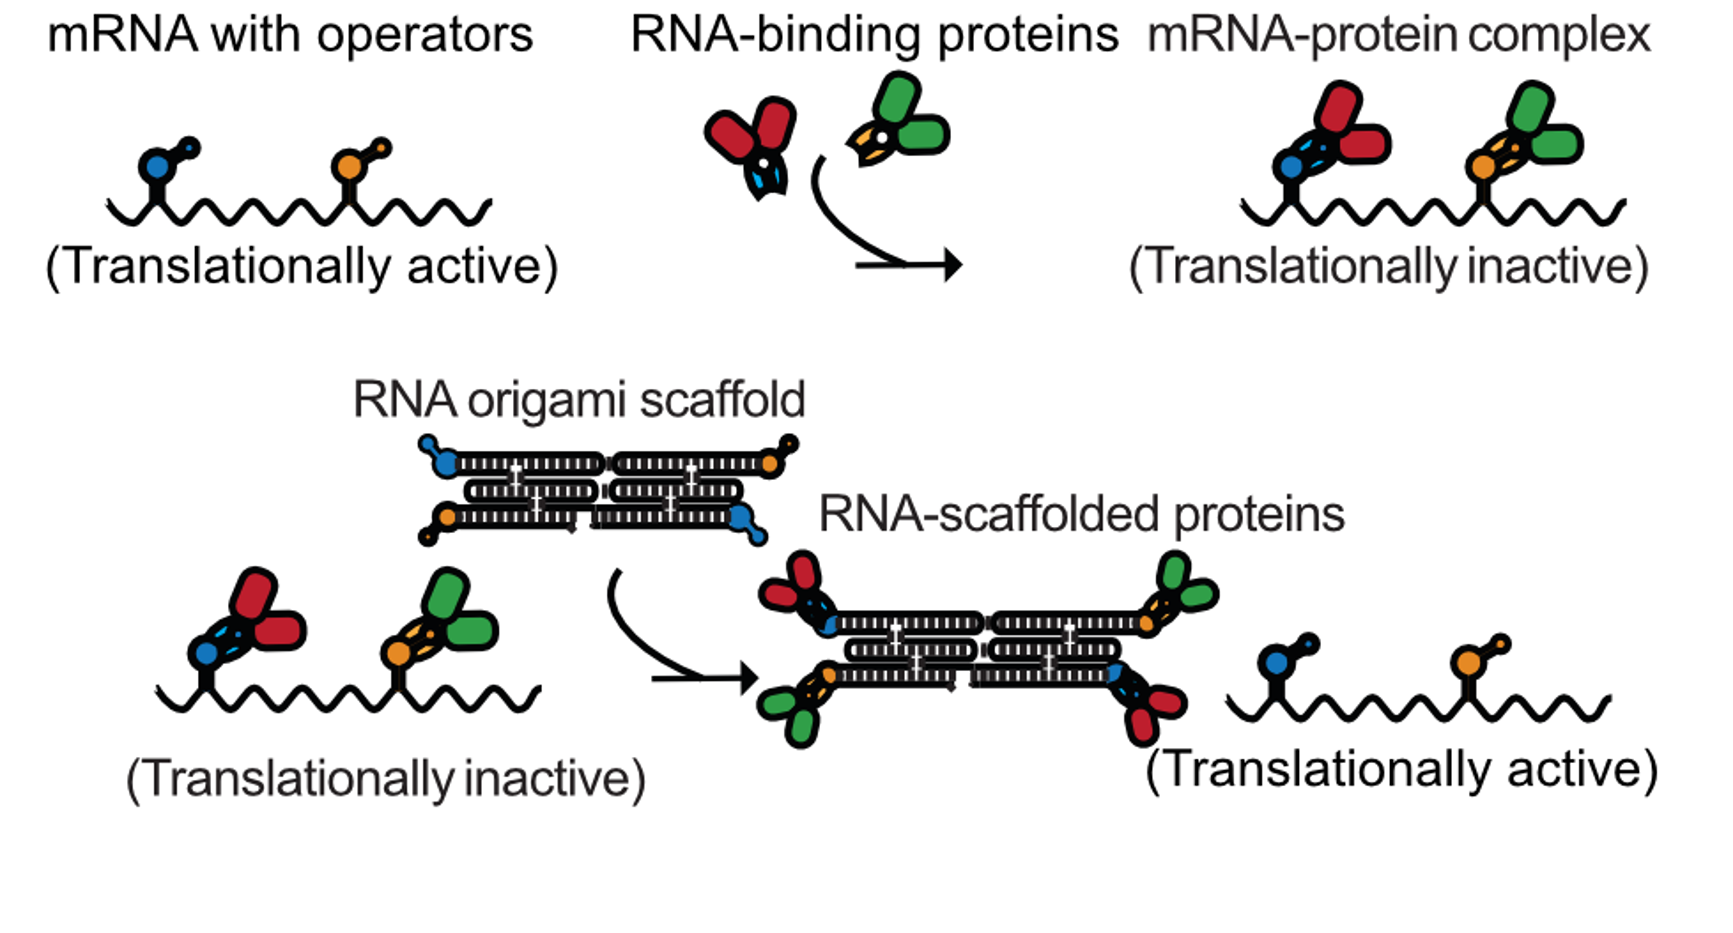 An mRNA with operators is inhibited by the proteins they express. RNA origami molecules serve as sponges that bind the proteins and make the mRNAs translationally active again. Graphics by Michael Nguyen.